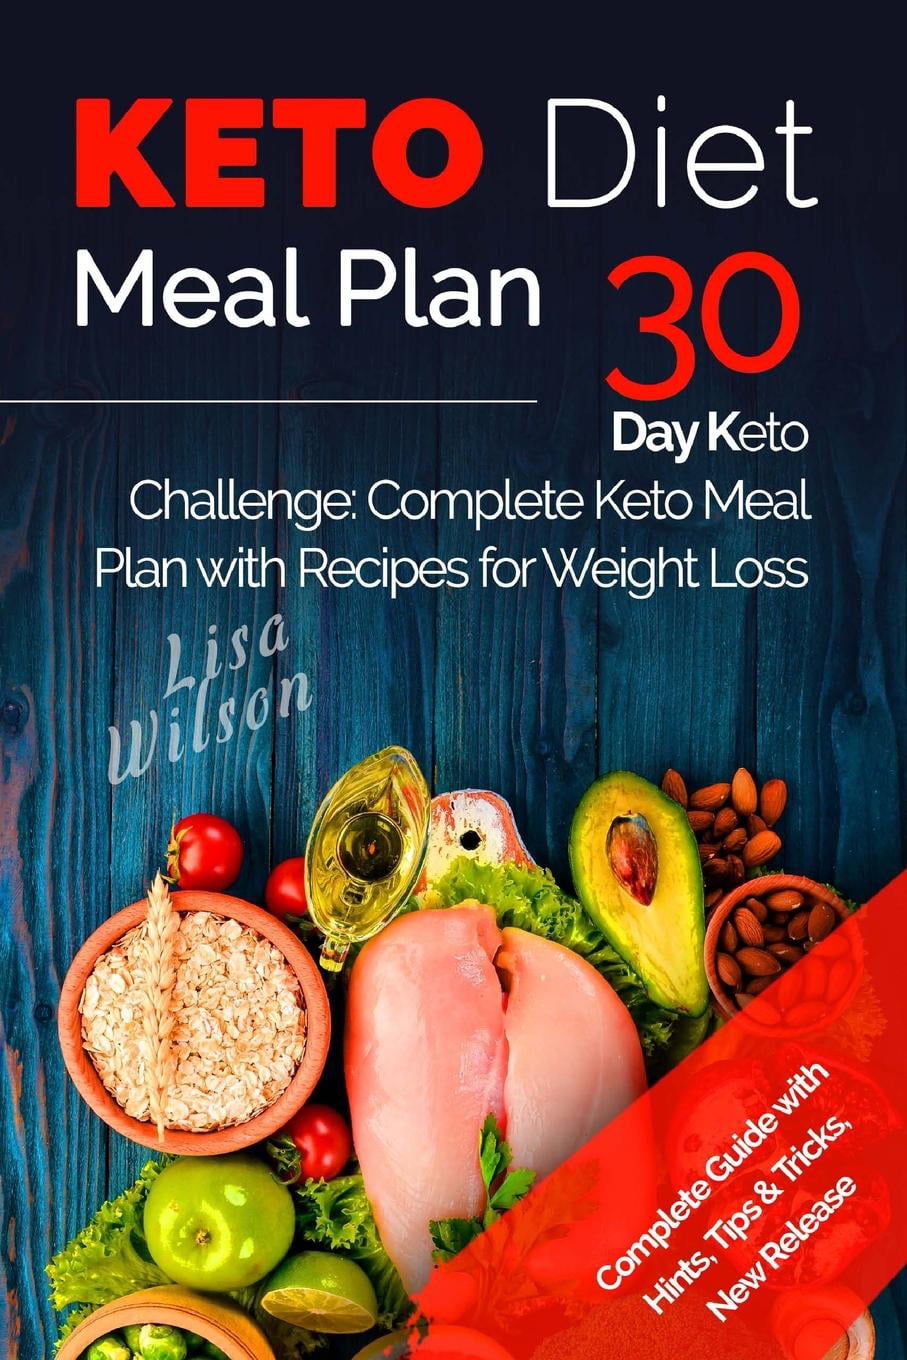 Keto Diet Meal Plan : 30 Day Keto Challenge: Complete Keto Meal Plan ...